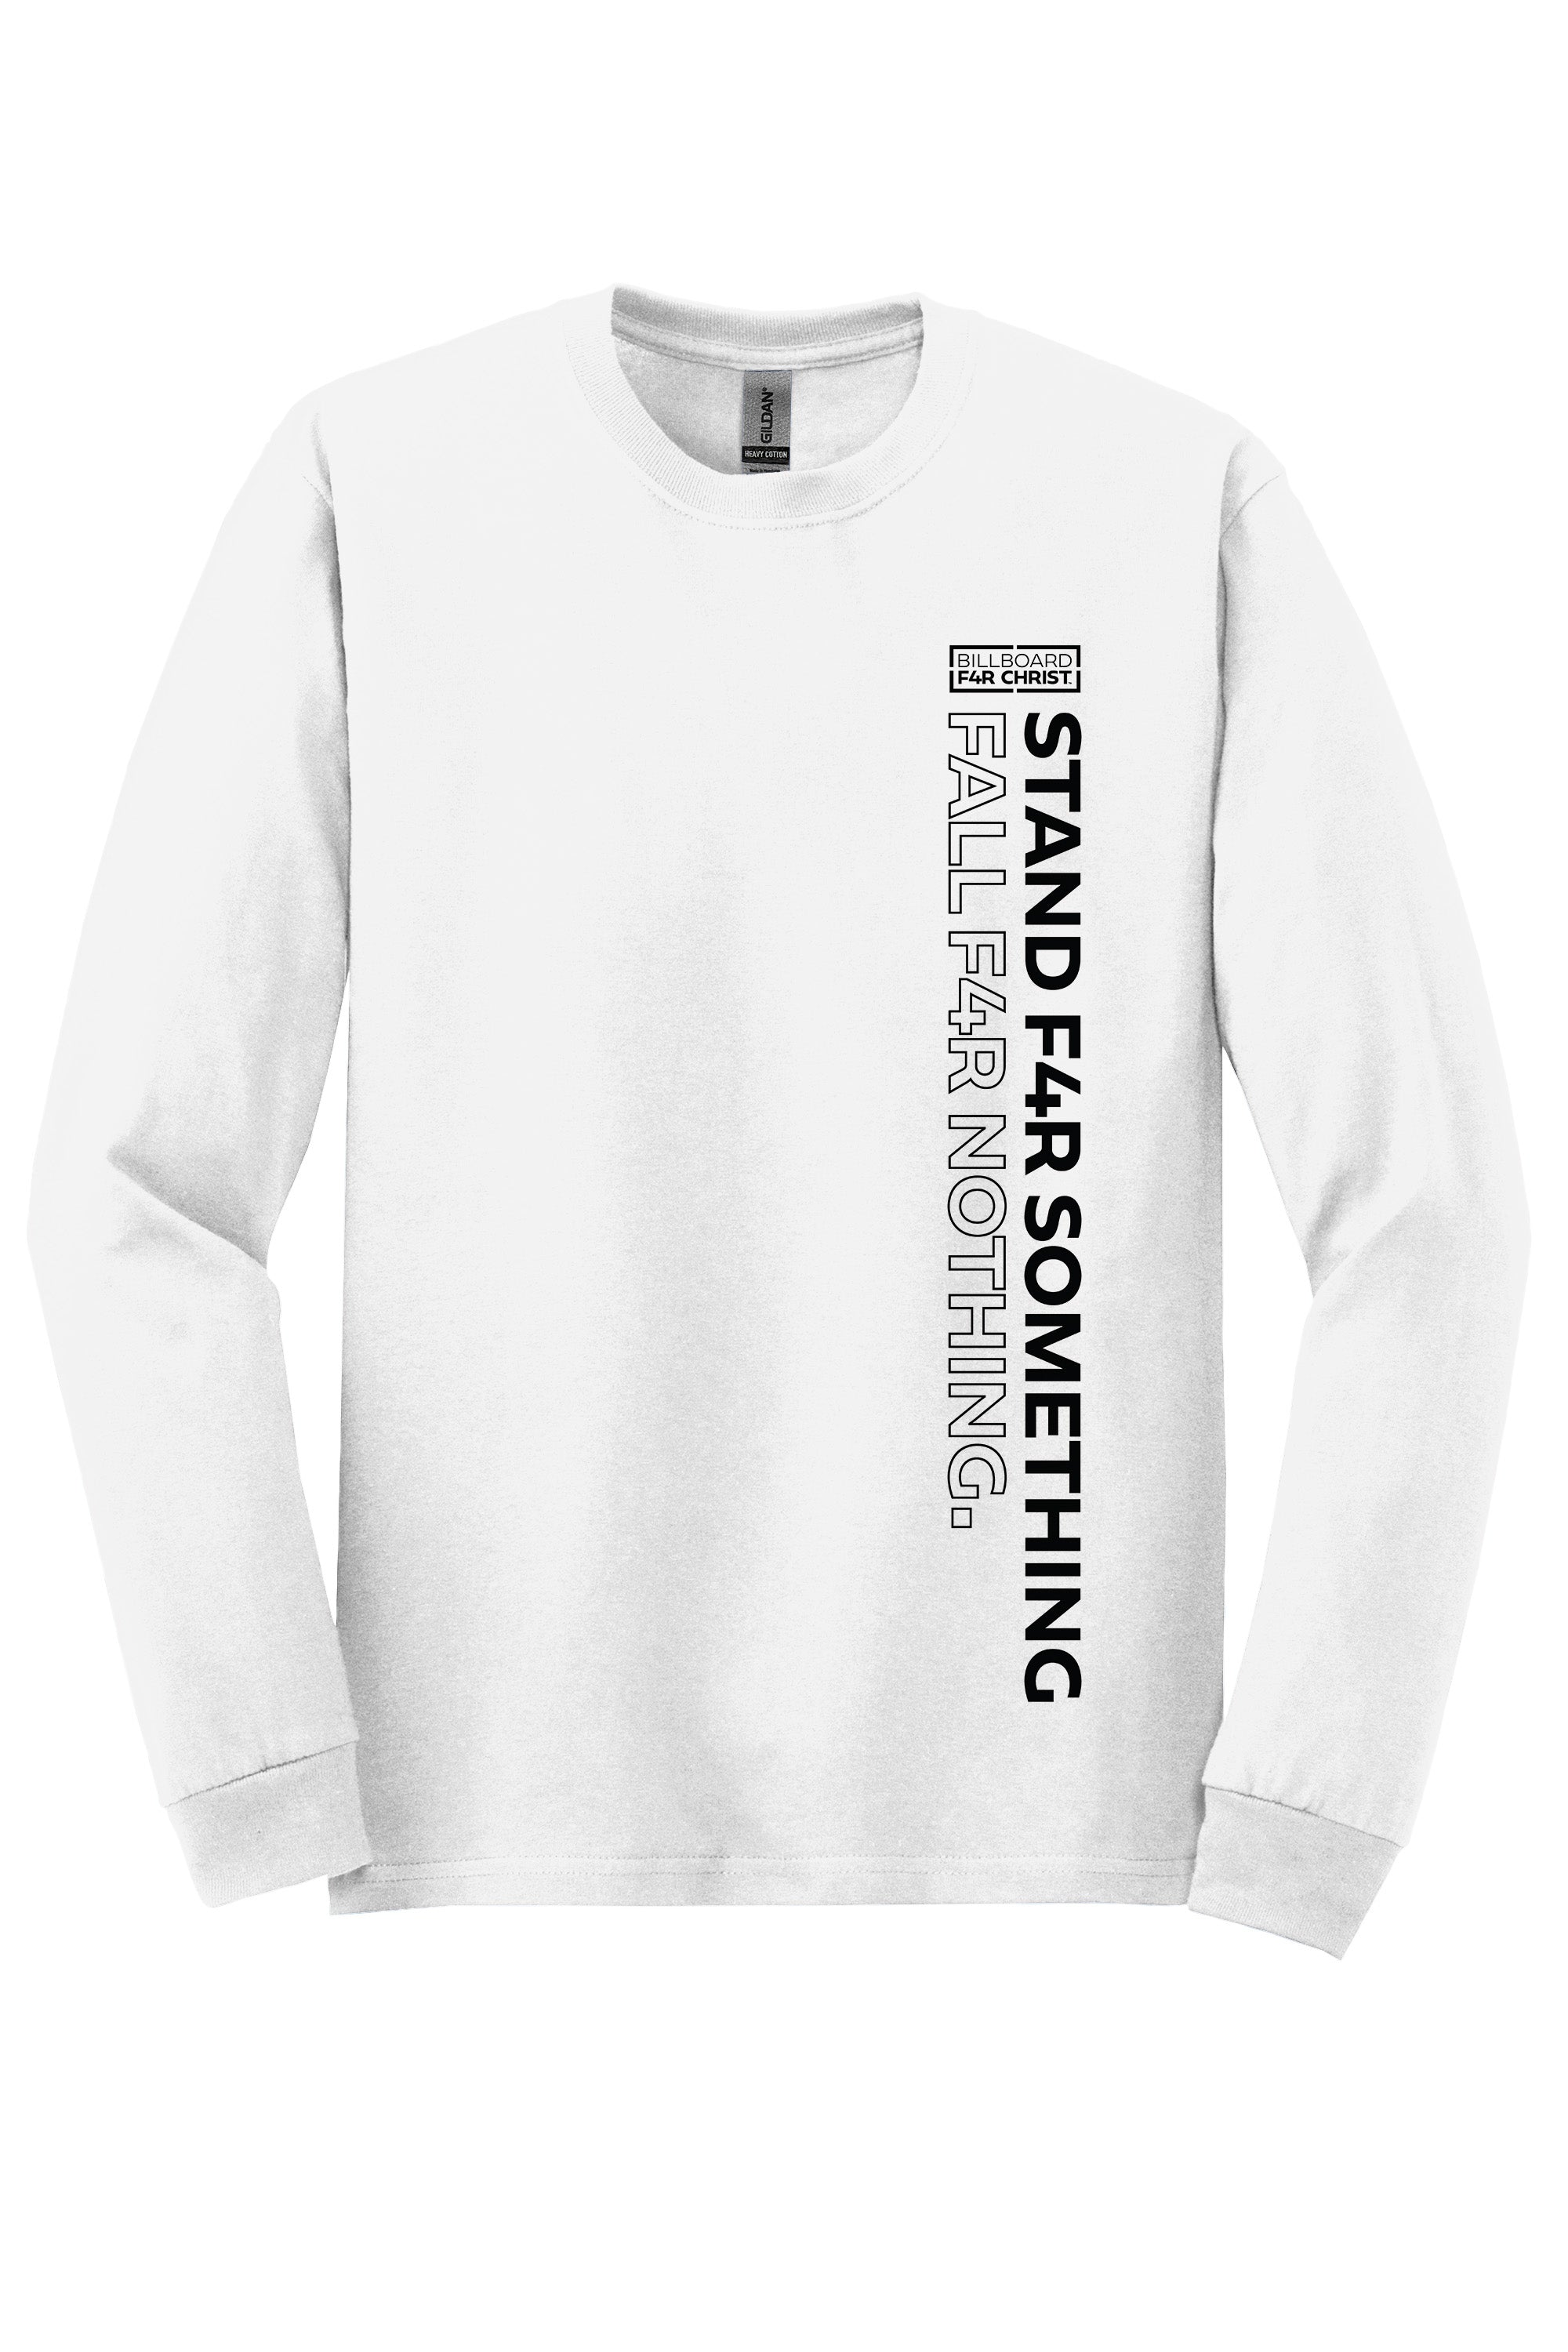 Stand F4R Something Unisex Durable Long Sleeve